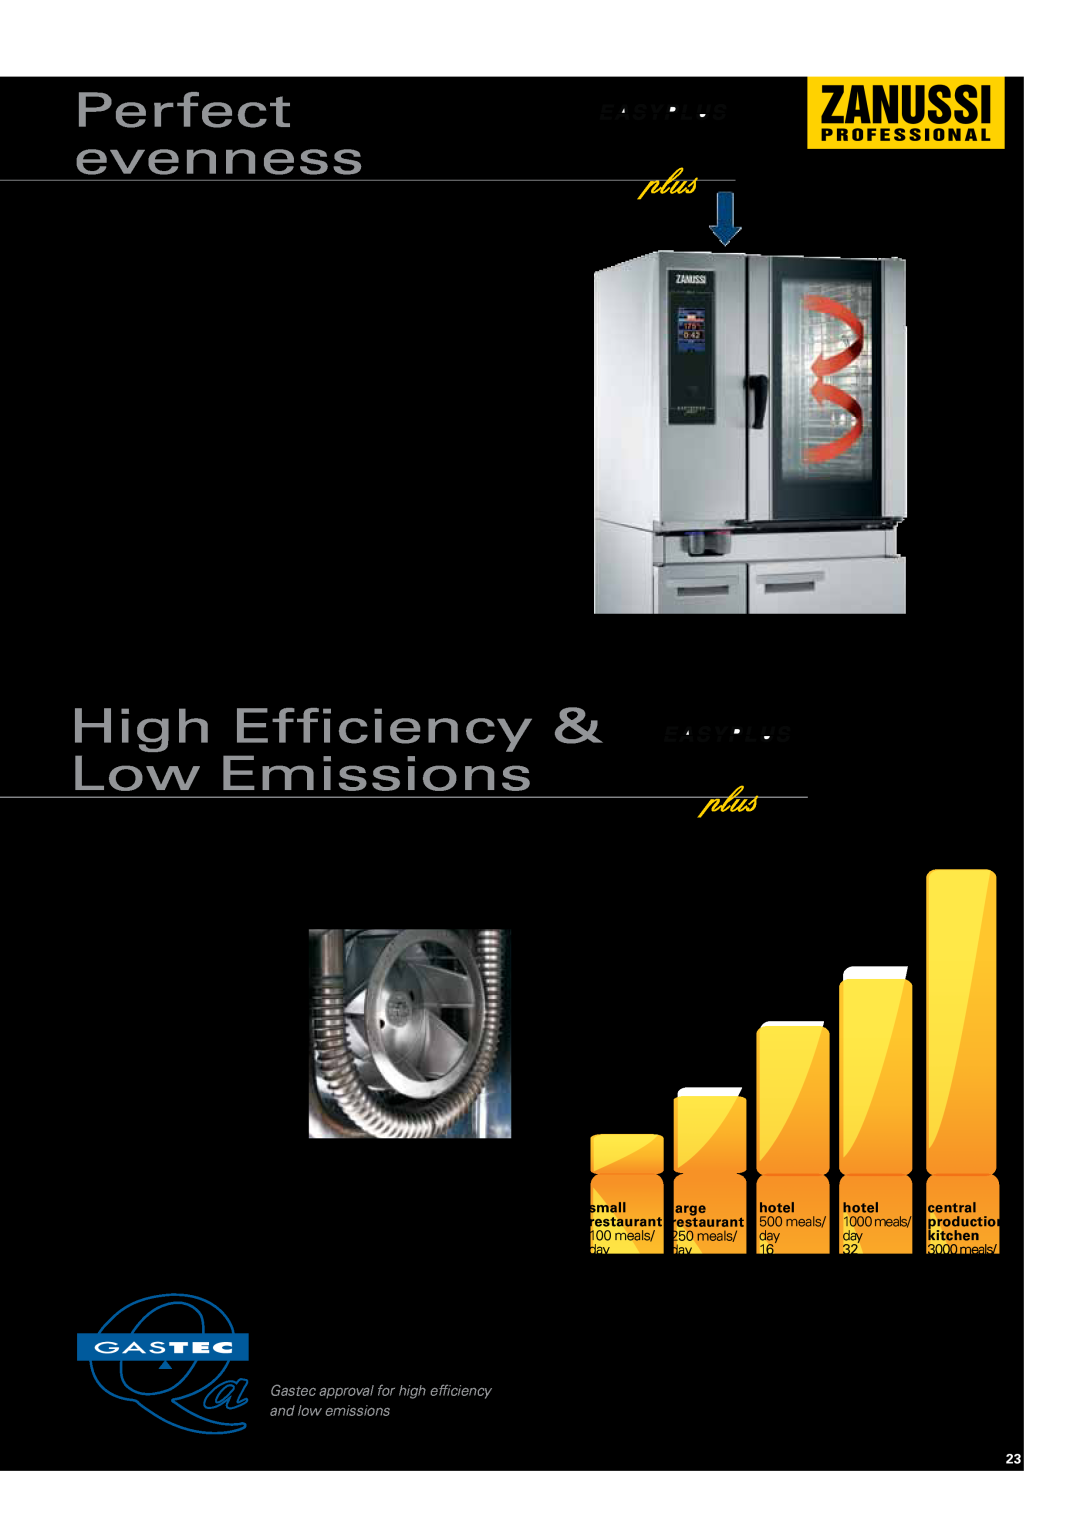 Zanussi Convection Oven Perfect evenness, High Efficiency Low Emissions, Annual savings with, EasyLine gas burners € € € € 